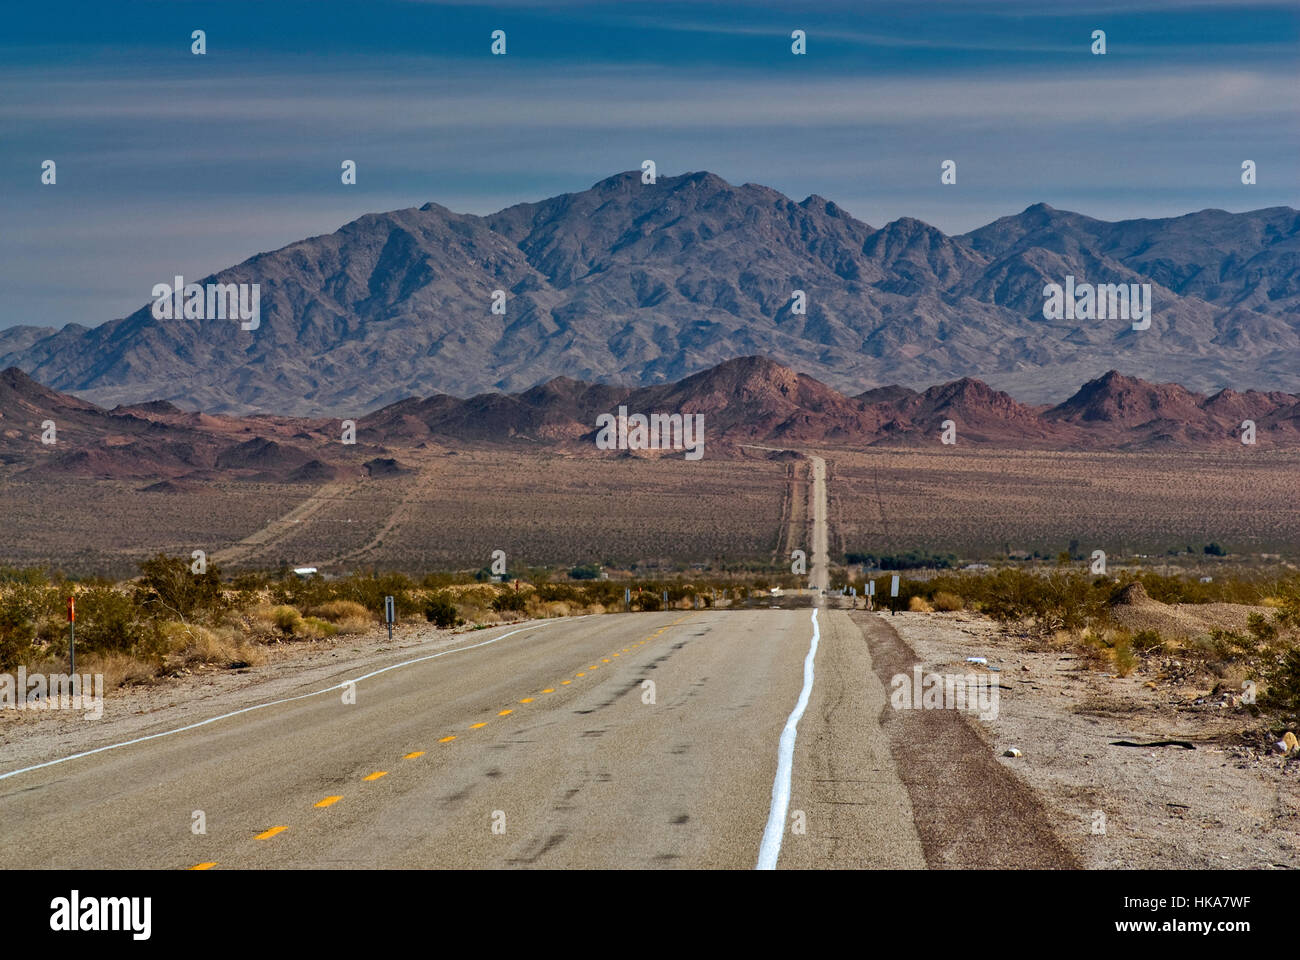 Route 66, Old National Trail Highway, Mojave Trails National Monument, Dead Mountains in dist, near Chambless, California, USA Stock Photo